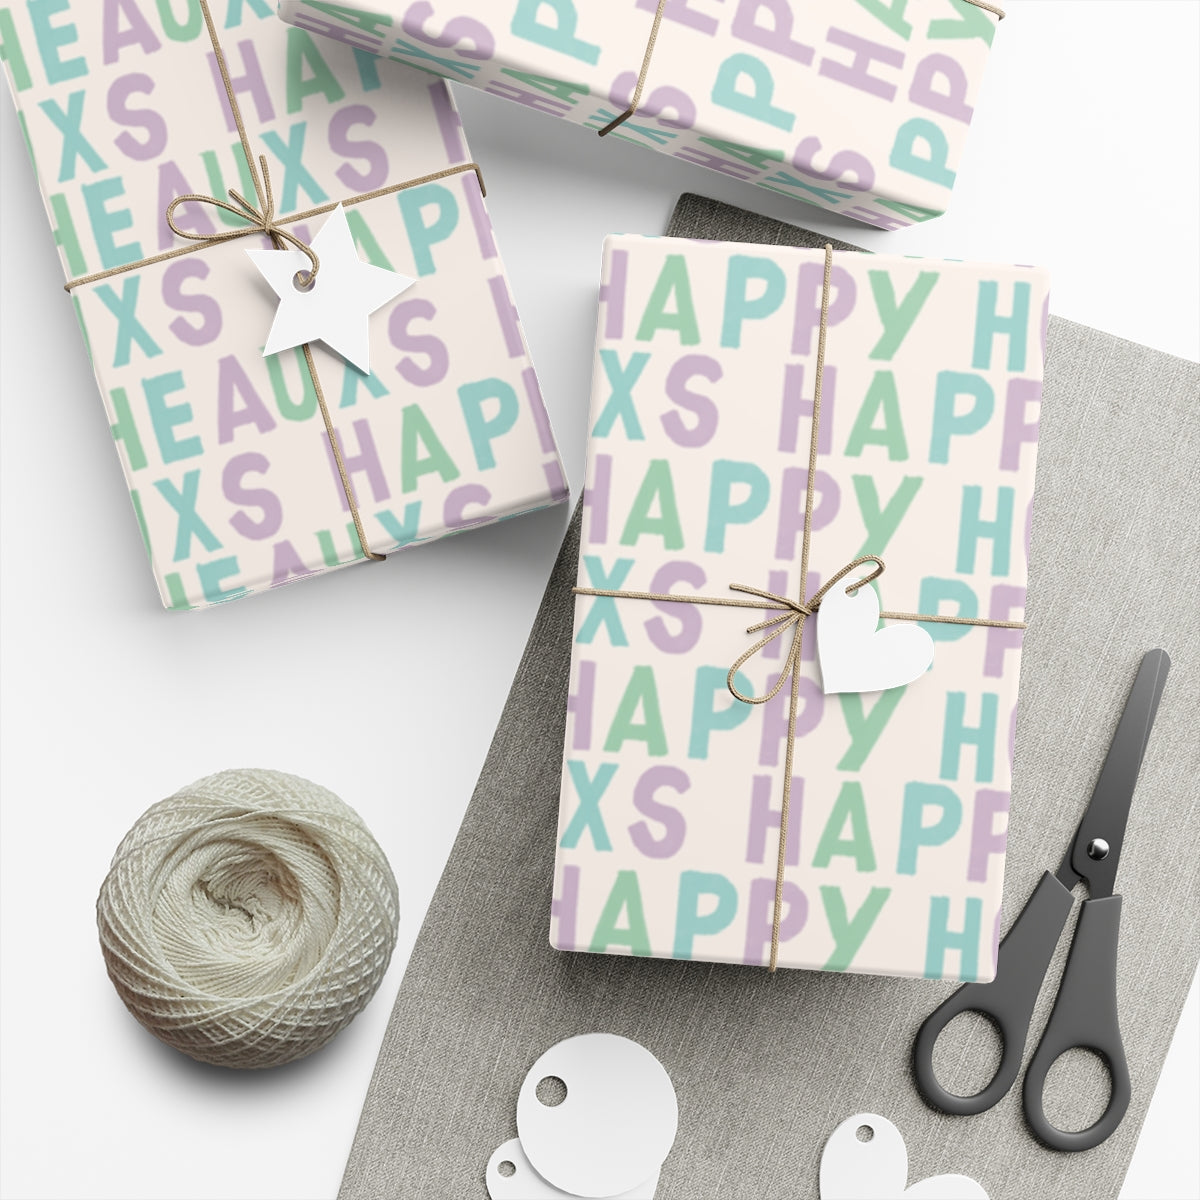 Funny Christmas Gift Wrapping Paper Roll | Happy Holidays Heauxs | Heaux Funny Party Event | Gift Wrap | Heaux heaux heaux | Friend Gift Ideas | Christmas Prank Gift